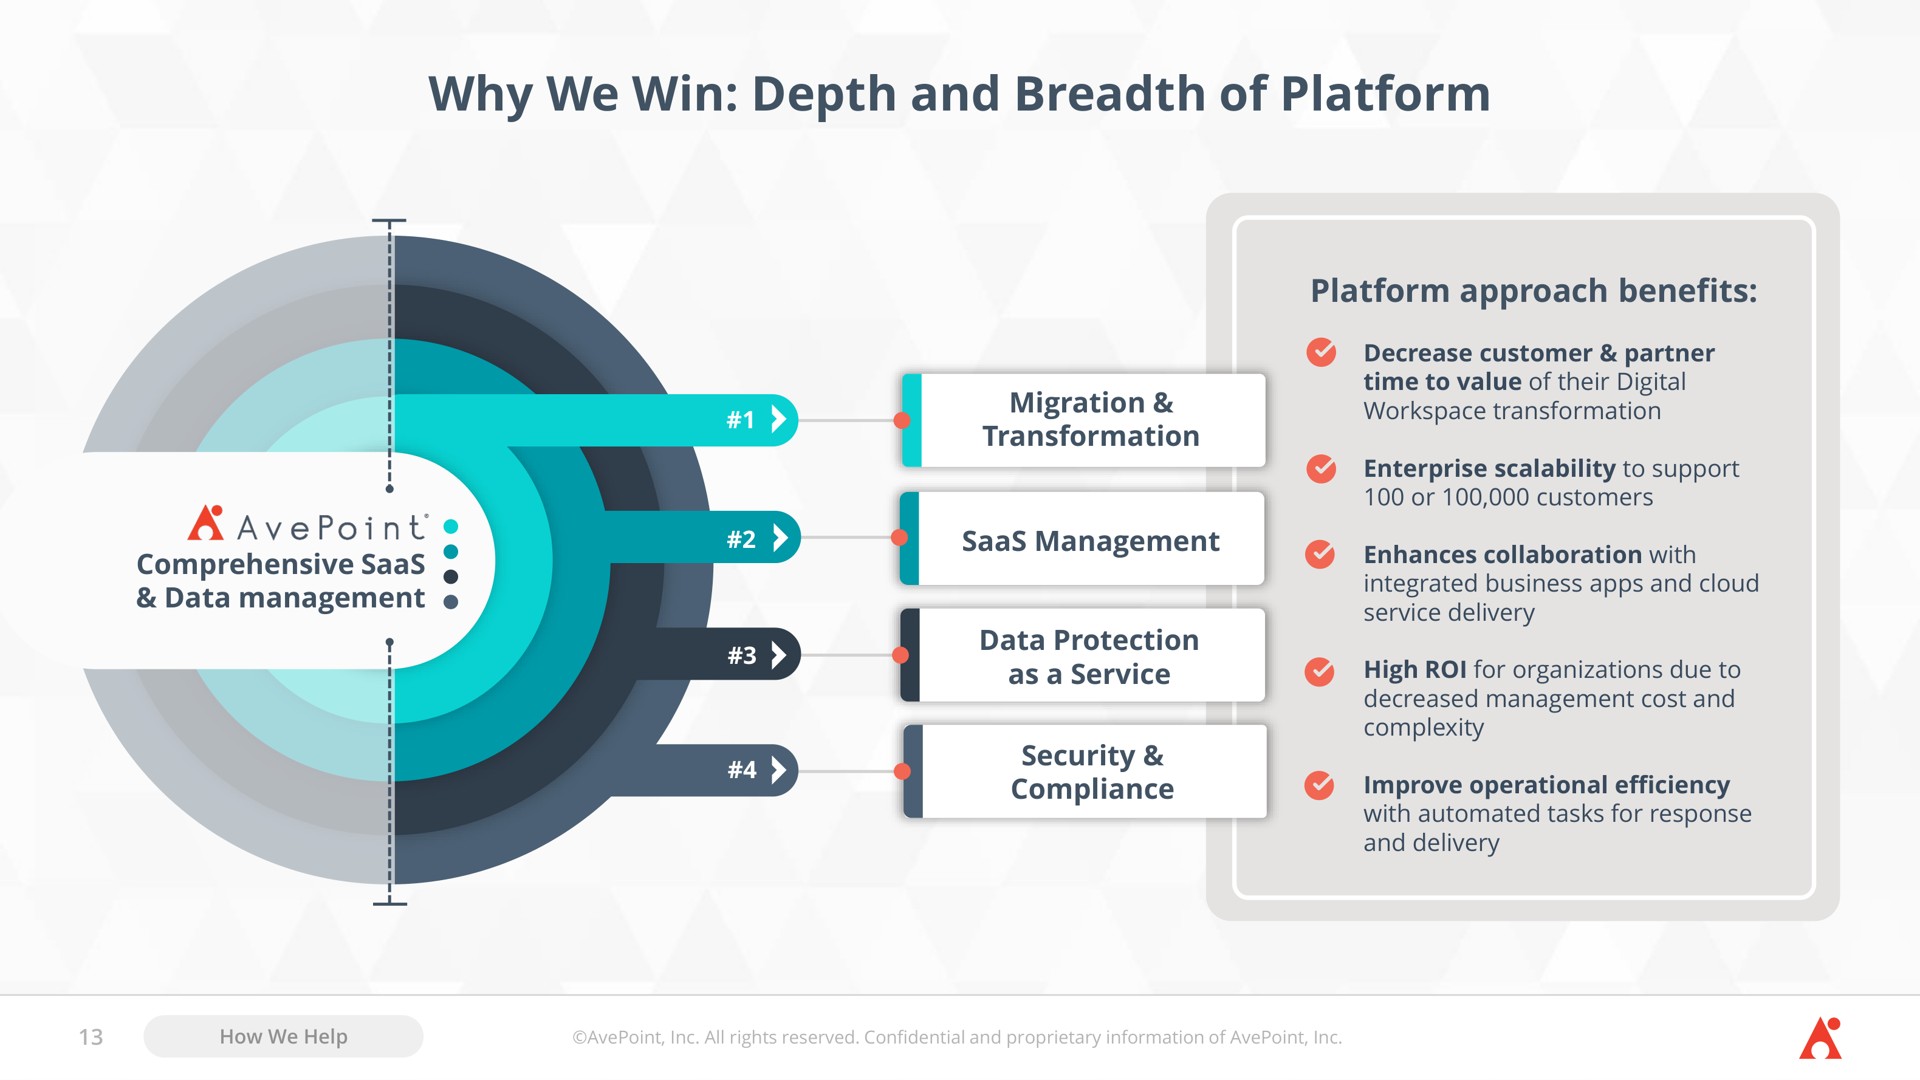 why we win depth and breadth of platform comprehensive data strategy platform approach benefits | AvePoint